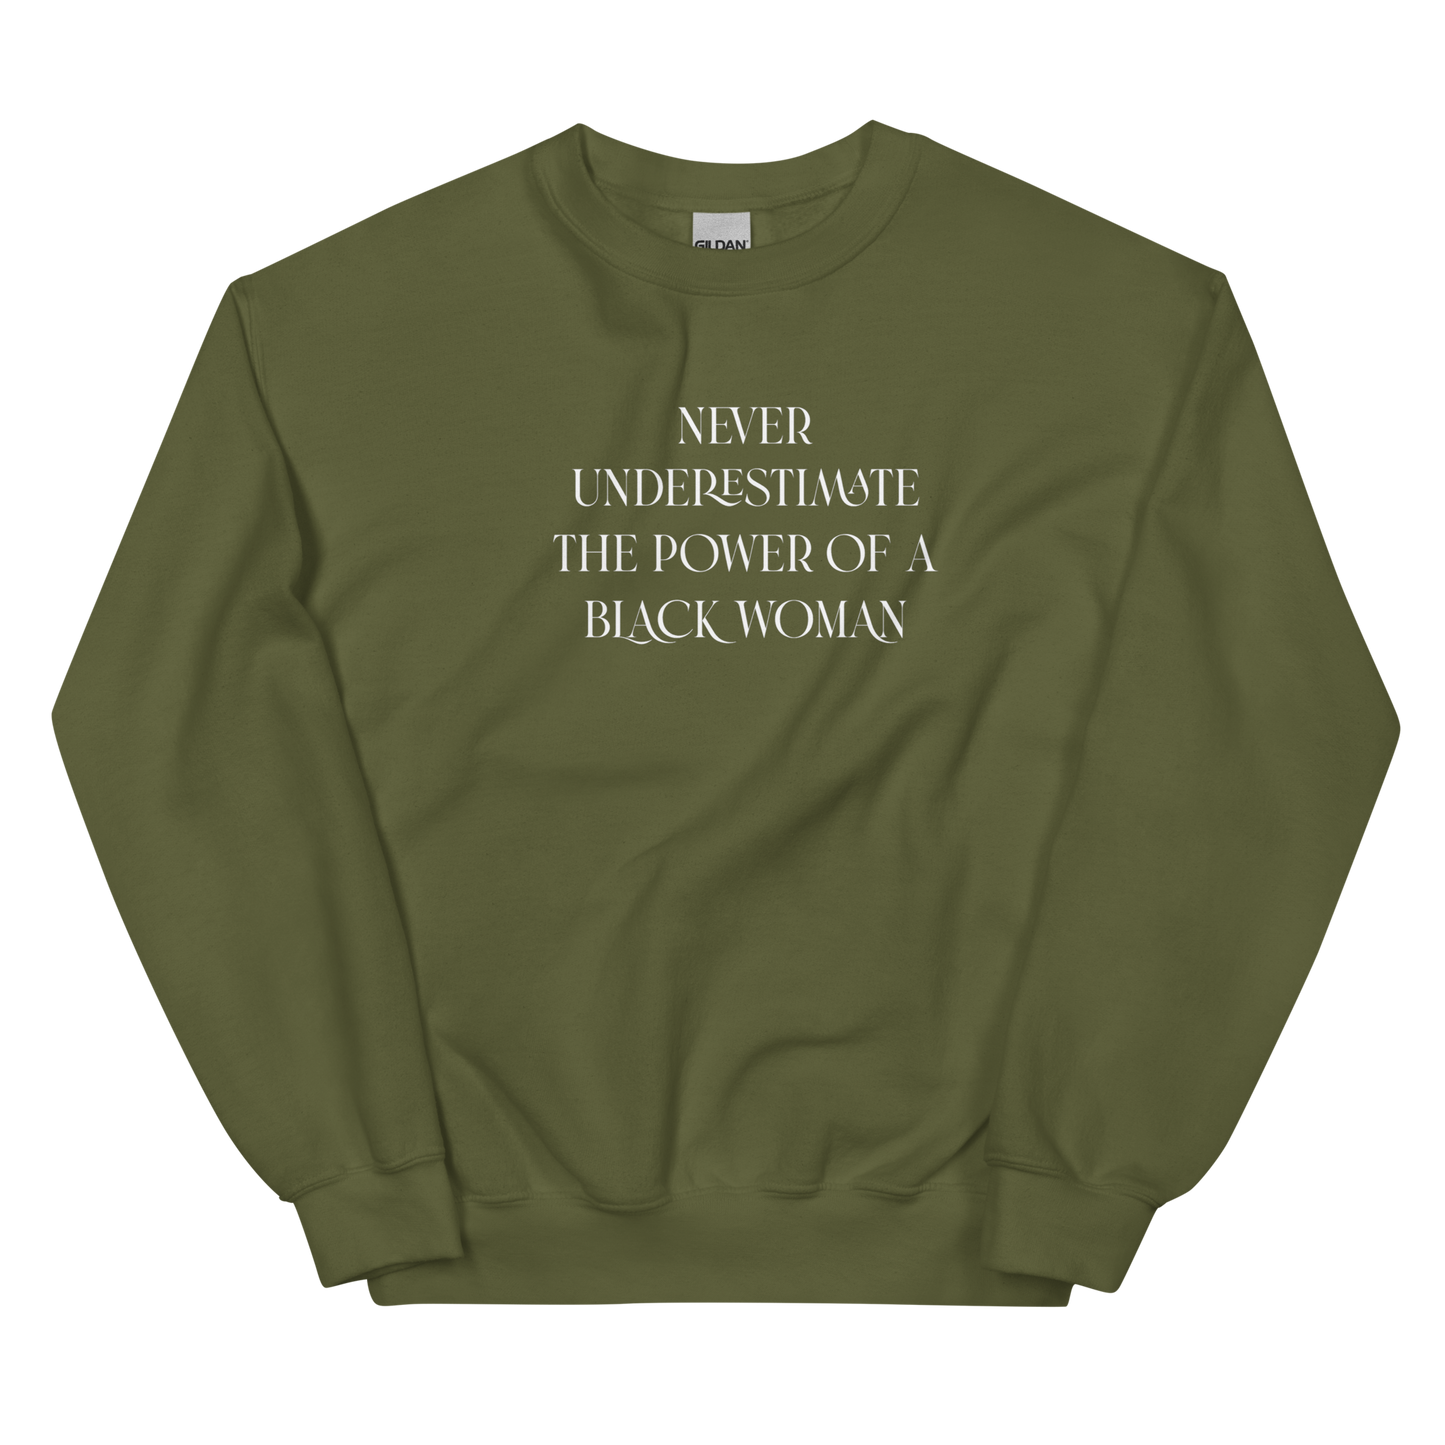 Never Underestimate the Power of a Black Woman Crewneck